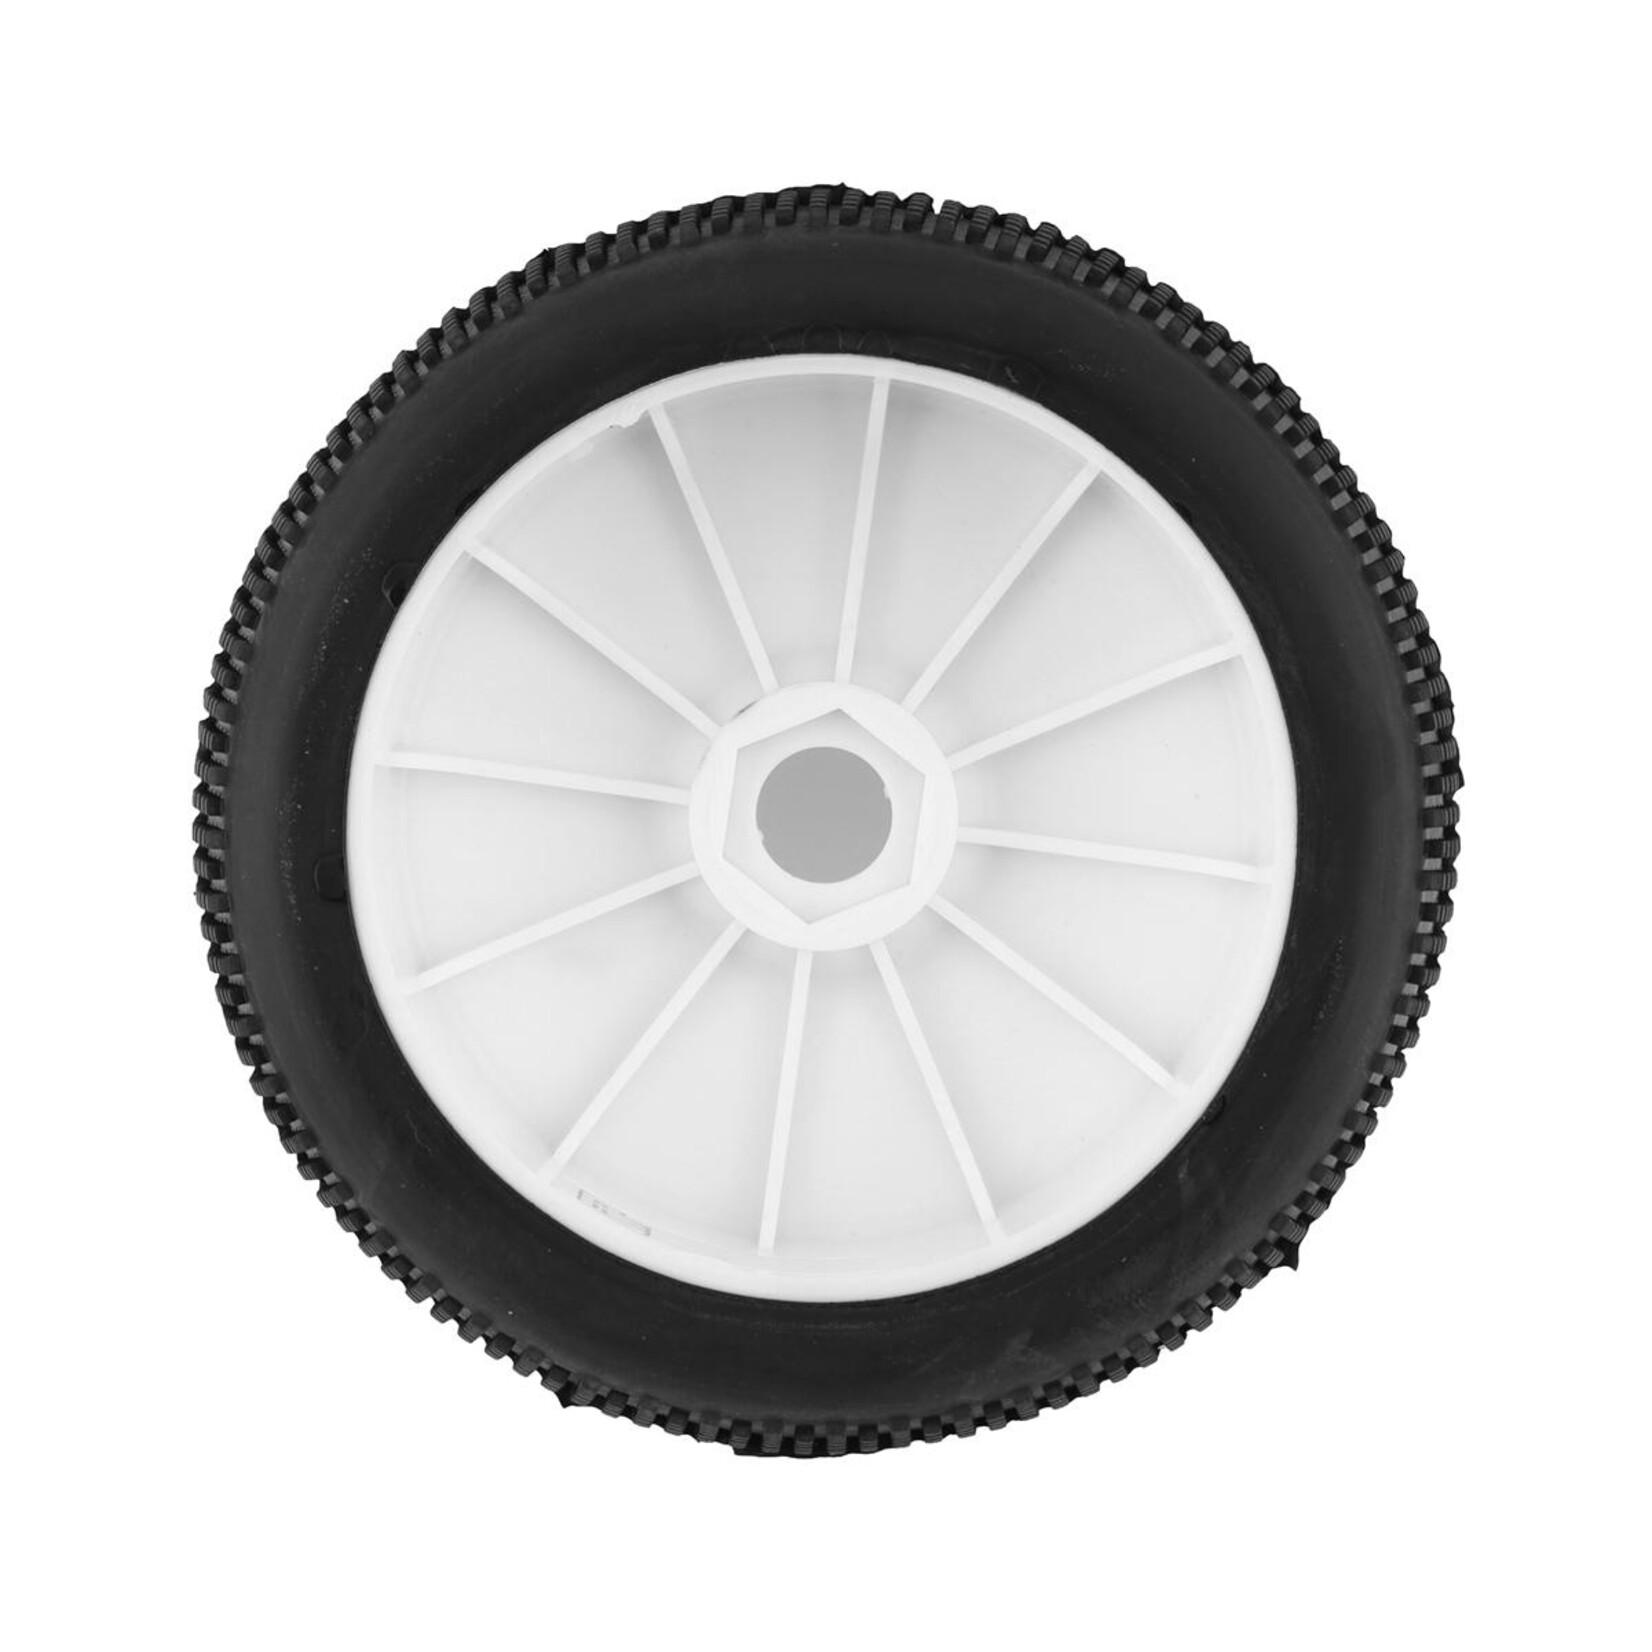 GRP GRP Cubic Pre-Mounted 1/8 Buggy Tires (2) (White) (Medium) #GBX03B